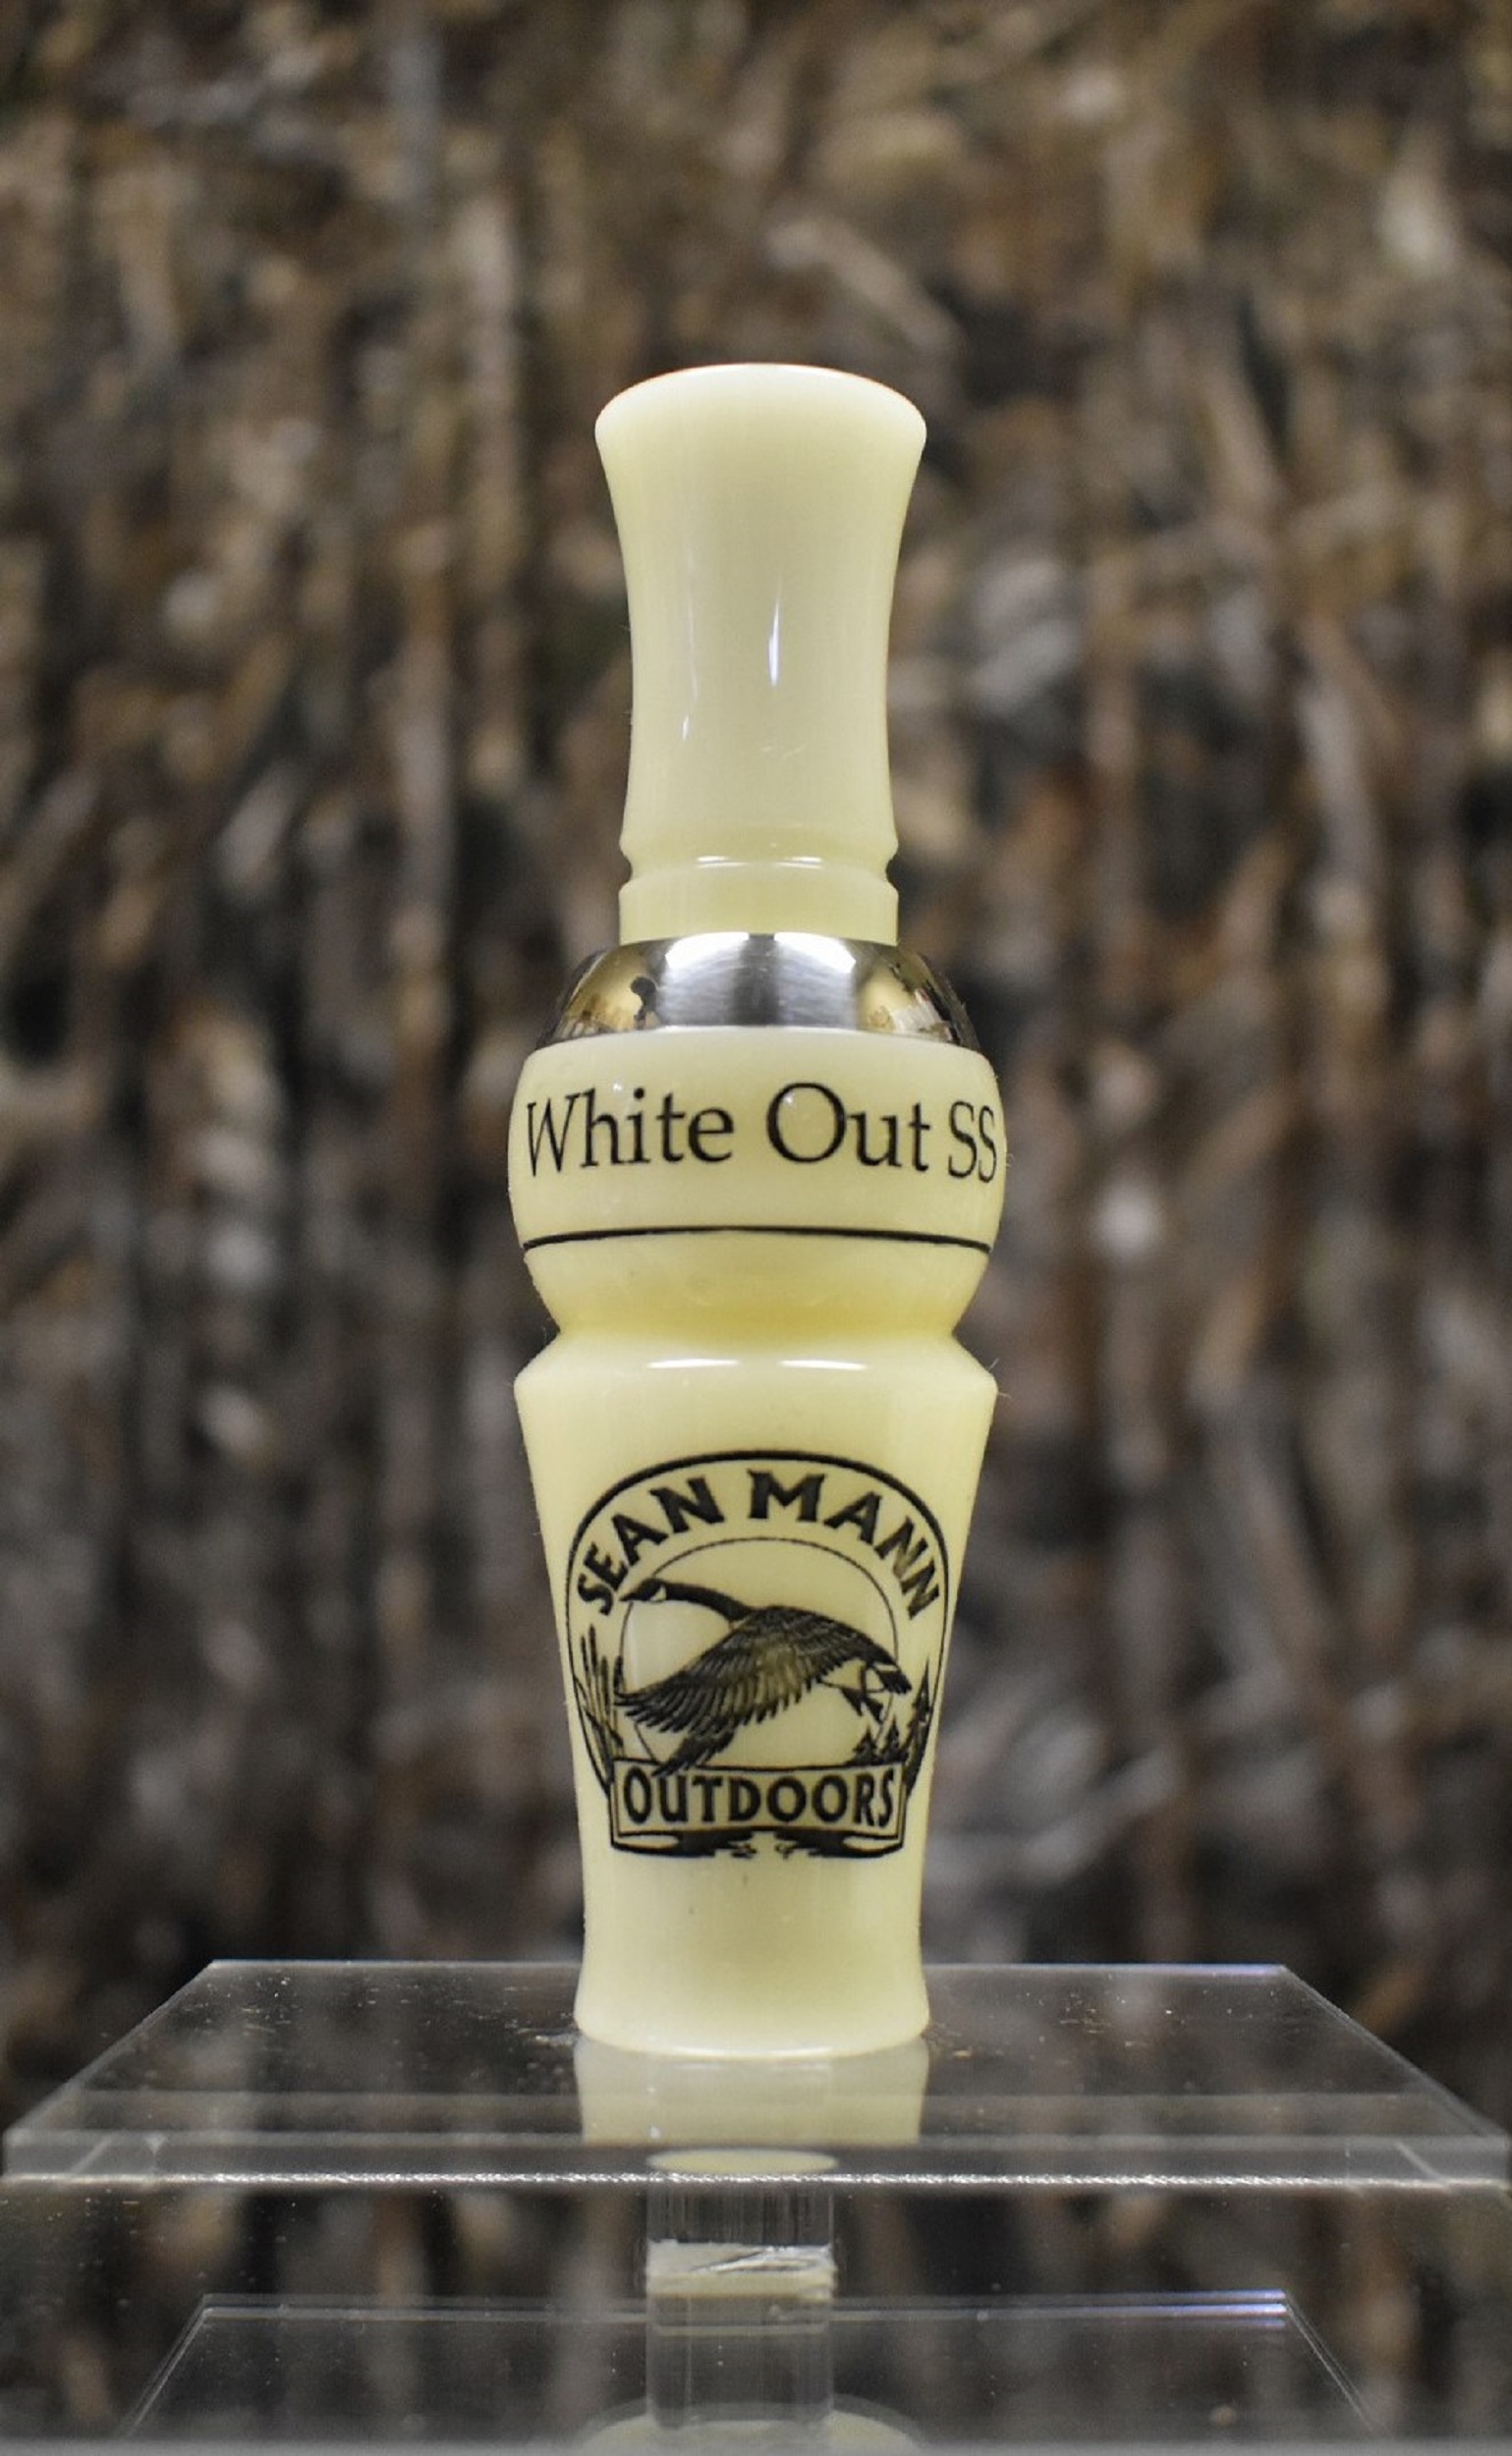 White Out SS World Champion Snow Goose- Banded Ivory Acrylic